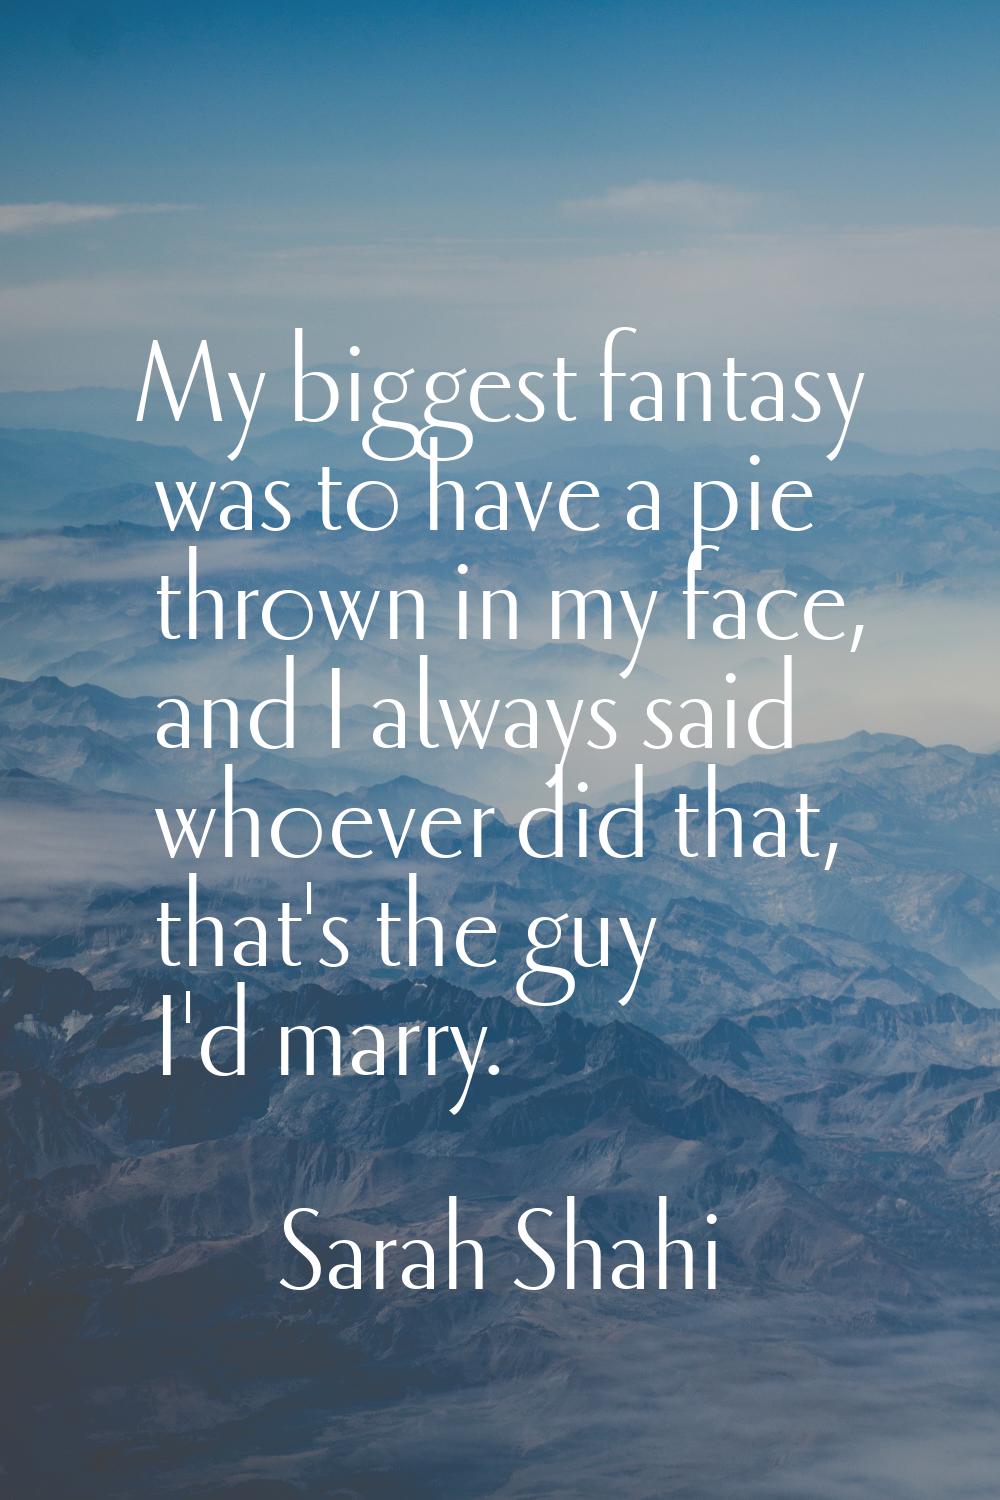 My biggest fantasy was to have a pie thrown in my face, and I always said whoever did that, that's 